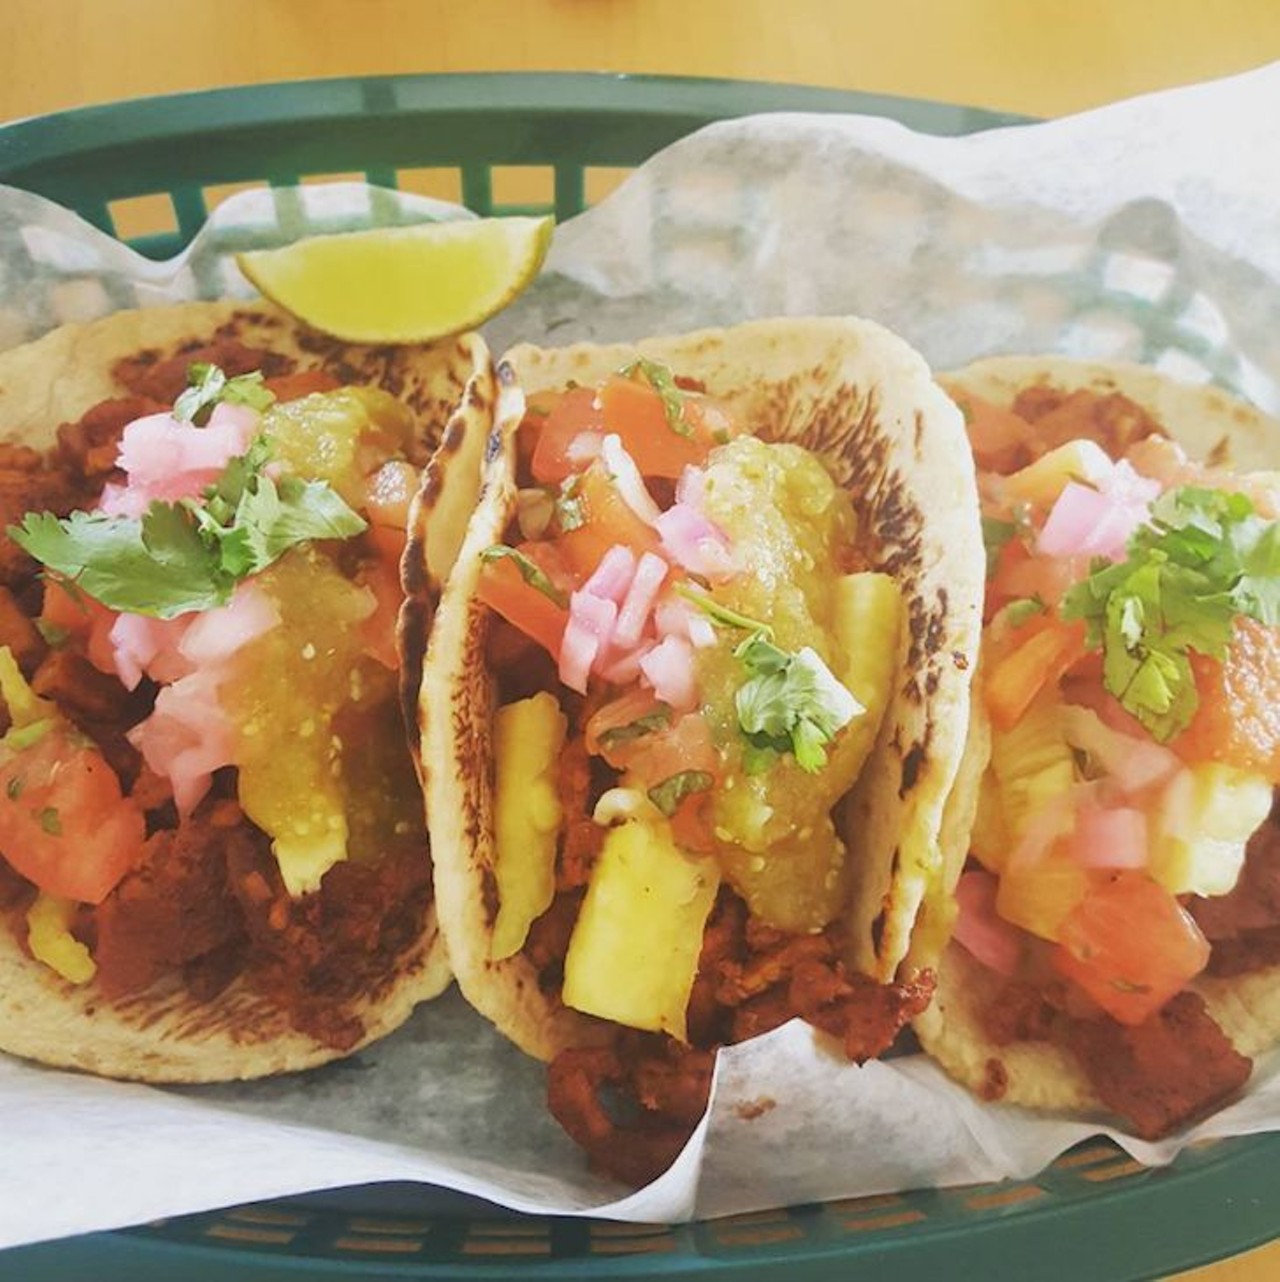 What we recommend: tacos al pastor 
Porky bits and pineapple drizzled in a zesty spice-infused salsa make these tacos a stand-out from the rest. Topped off with tomato and parsley, the colorful creation brings the savory and sweet together.
Photo via kukuu1/Instagram